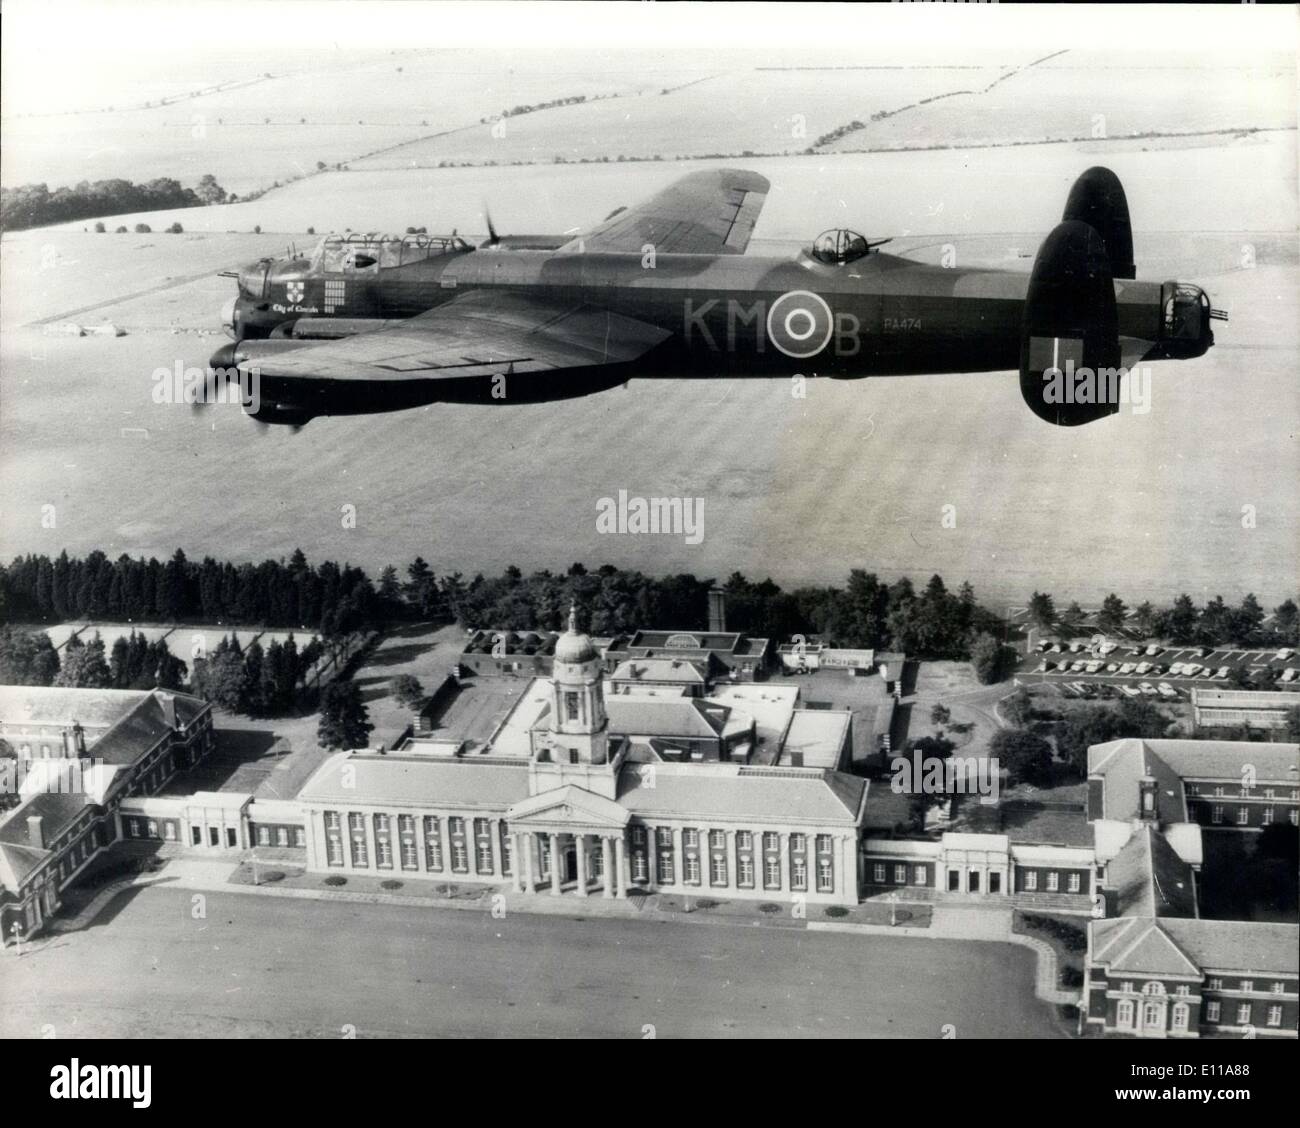 Sep. 27, 1976 - The Last Flying Lancaster Of The Raf Flies Past In Salute. Photo shows The last flying Lancaster of the Royal Air Force flies past in salute at the RAF College Cranwell to mark the last flight of her most successful show season. In a six-month season for 1976 the Lancaster has appeared at 65 air shows giving nostalgic thrills to an estimated one-and-a-half million aviation enthusiasts. Stock Photo